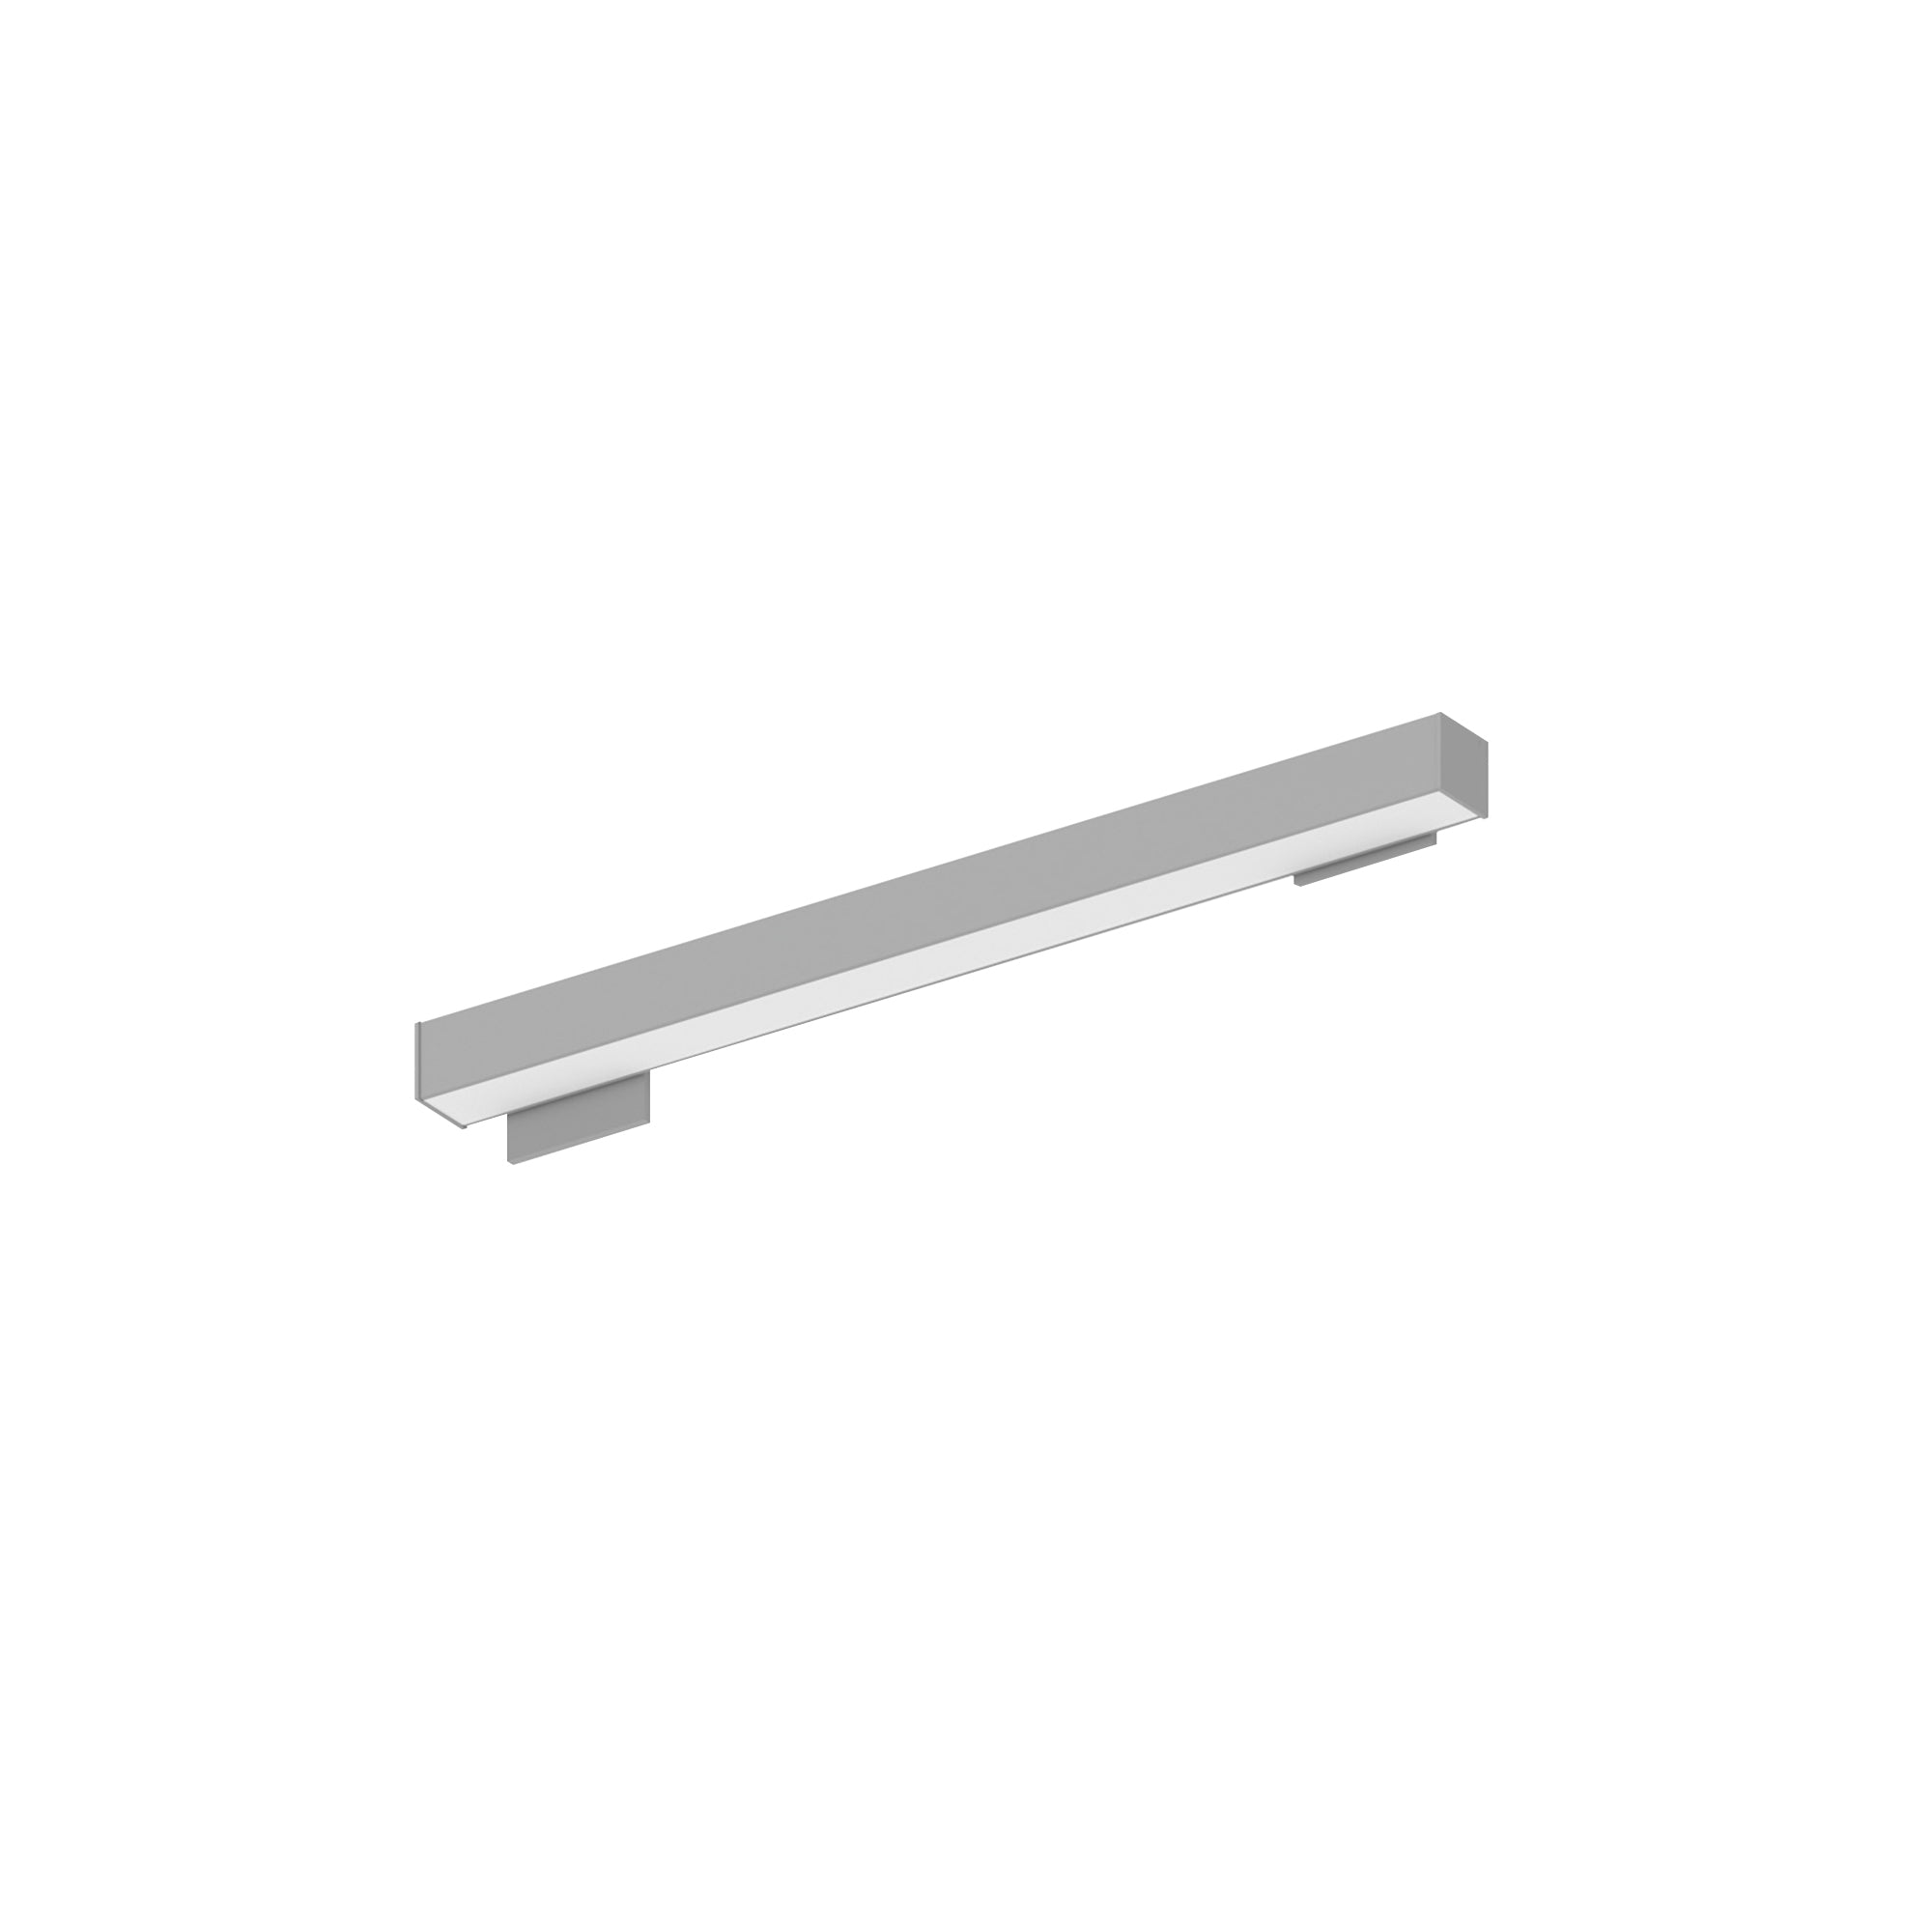 Nora Lighting NWLIN-21030A/L4-R2 - Linear - 2' L-Line LED Wall Mount Linear, 2100lm / 3000K, 4 Inchx4 Inch Left Plate & 2 Inchx4 Inch Right Plate, Aluminum Finish